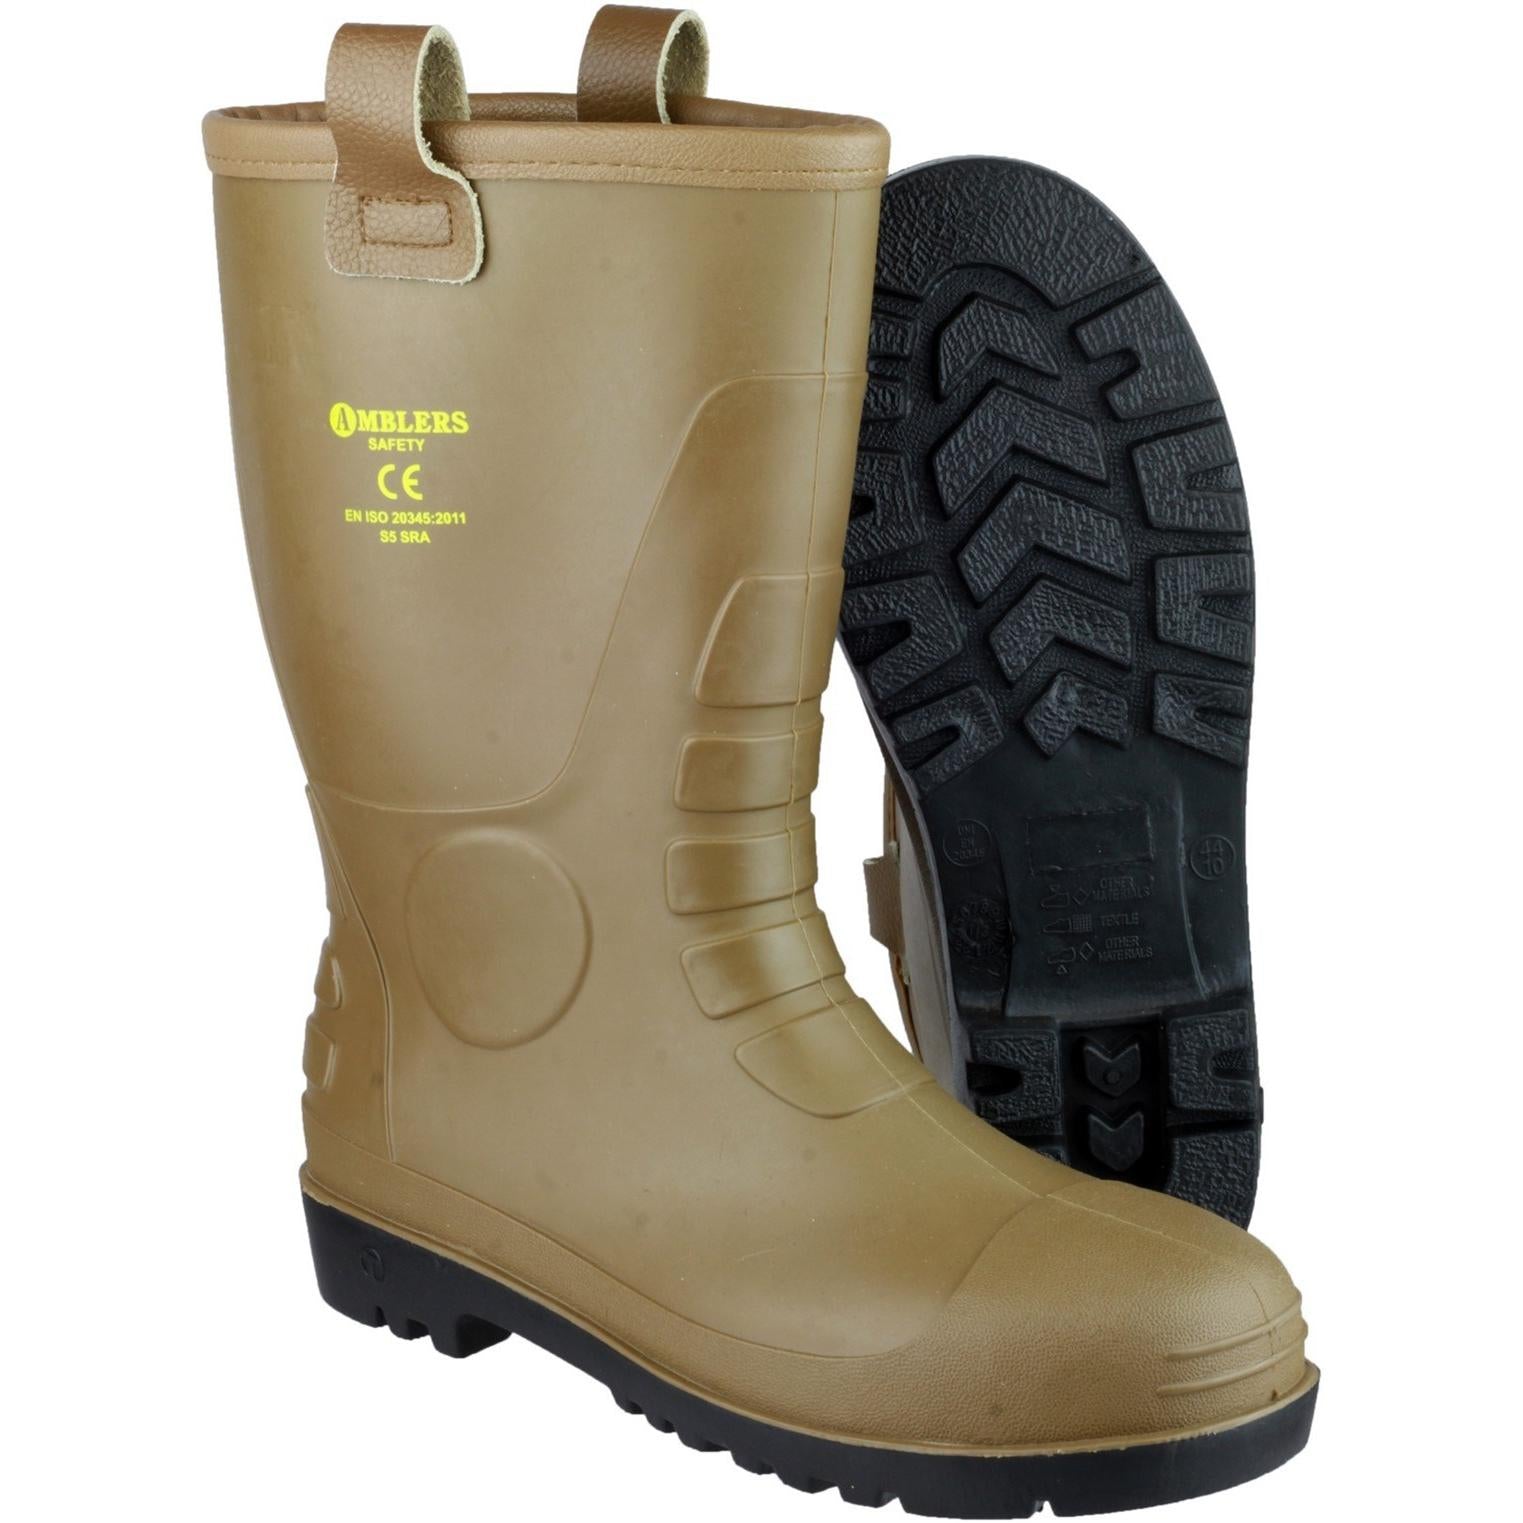 Amblers Safety FS95 Waterproof PVC Pull on Safety Rigger Boot